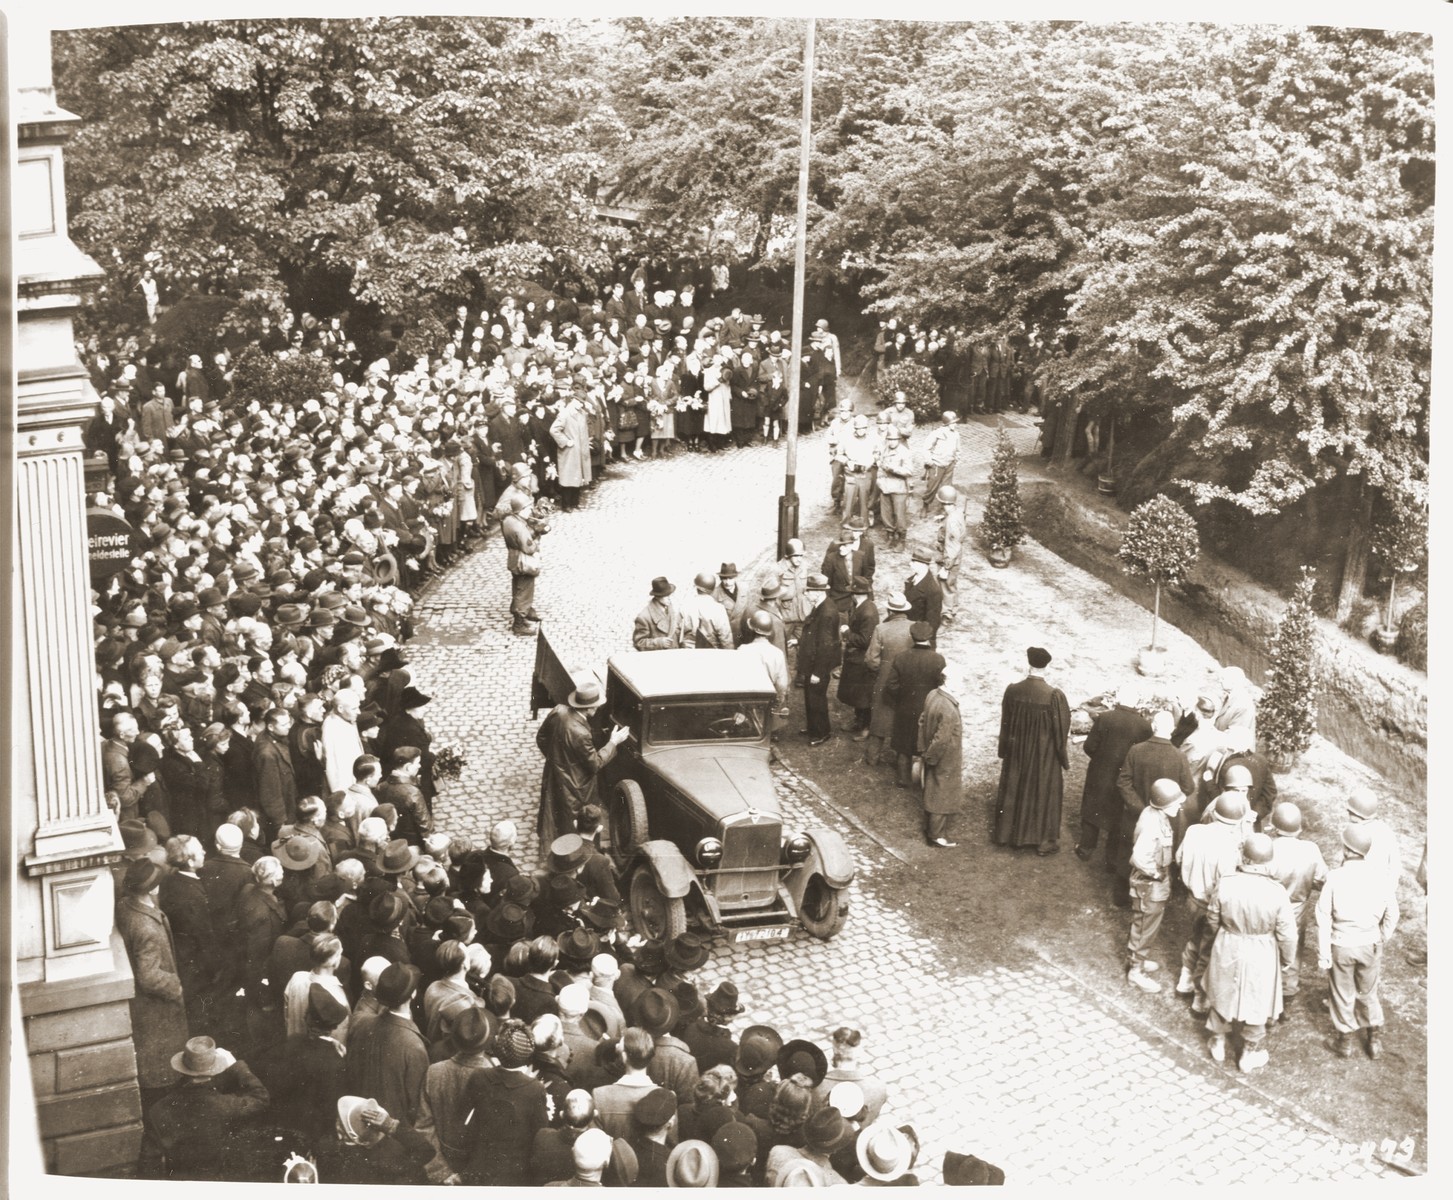 American soldiers and German civilians from Solingen-Ohligs attend funeral services for the 71 political prisoners, exhumed from a mass grave near the town, in front of the city hall.  

The victims, most of whom were taken from Luettringhausen prison, were shot and buried by the Gestapo following orders to eliminate all Reich enemies just before the end of the war.